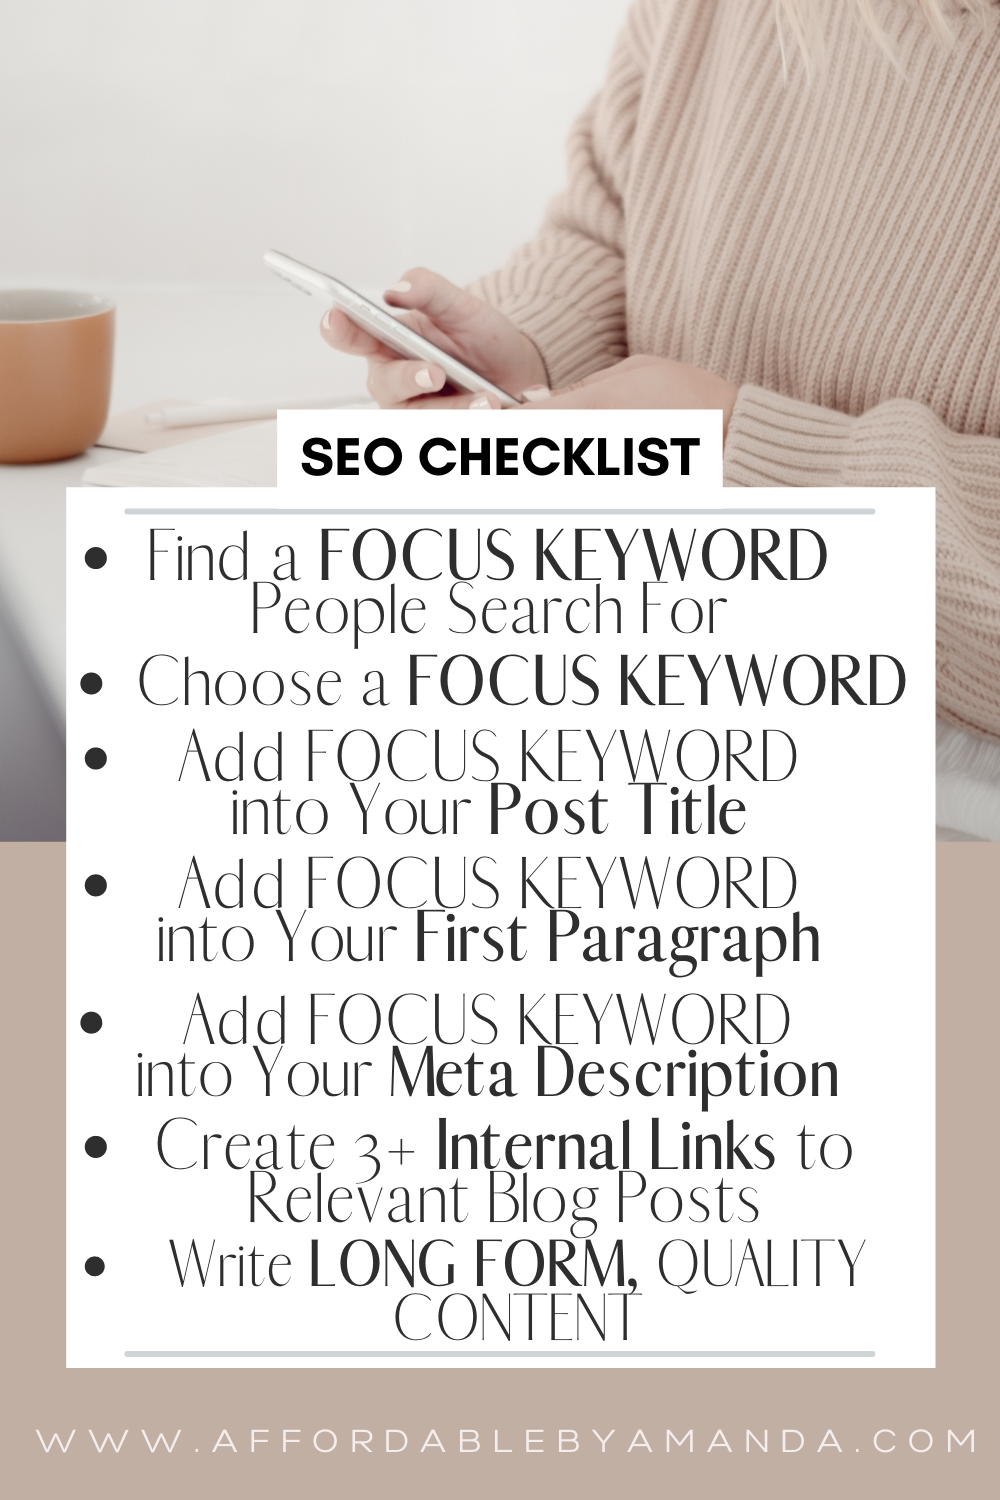 SEO Checklist 2021. 10 Best SEO Tips for Bloggers. What is SEO. SEO Strategy 2021. SEO Tips and Tricks. SEO Tips for Beginners.